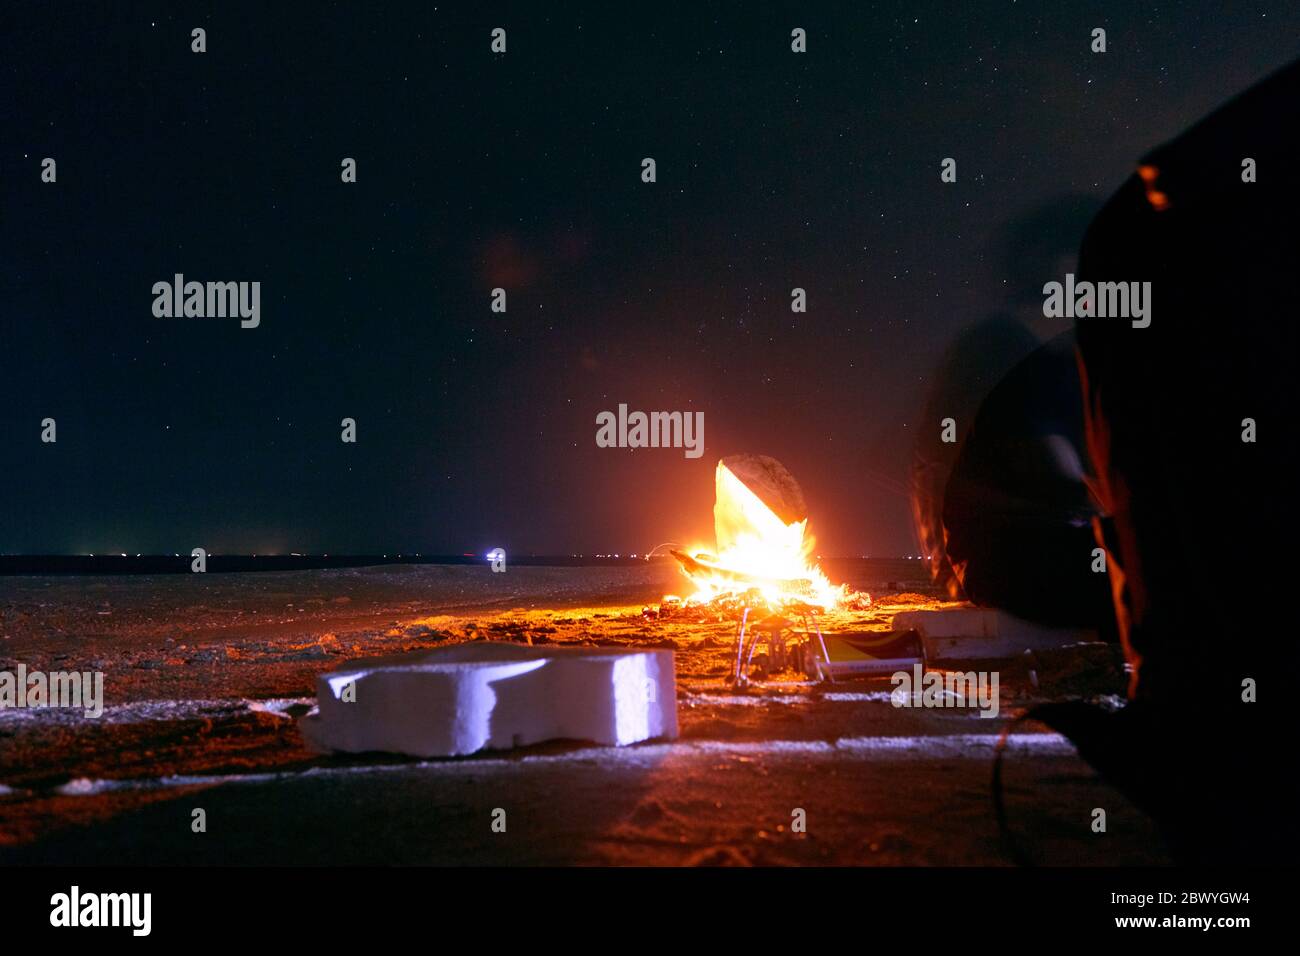 A tent glows under a night sky full of stars at the beach near the cam fire Stock Photo